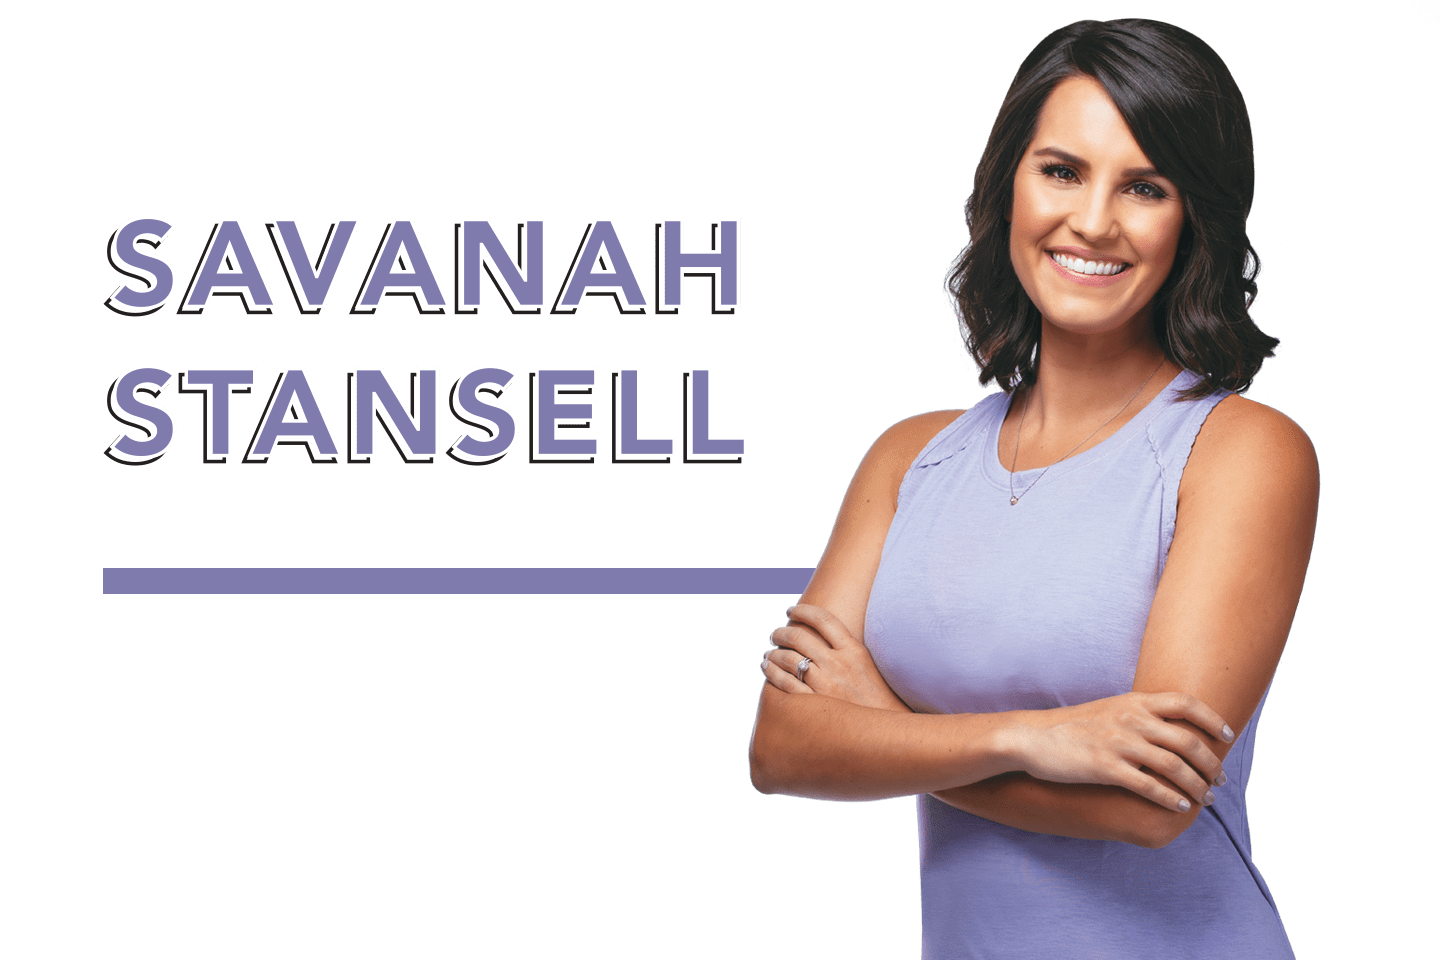 savanah stansell healthscope cover model chattanooga